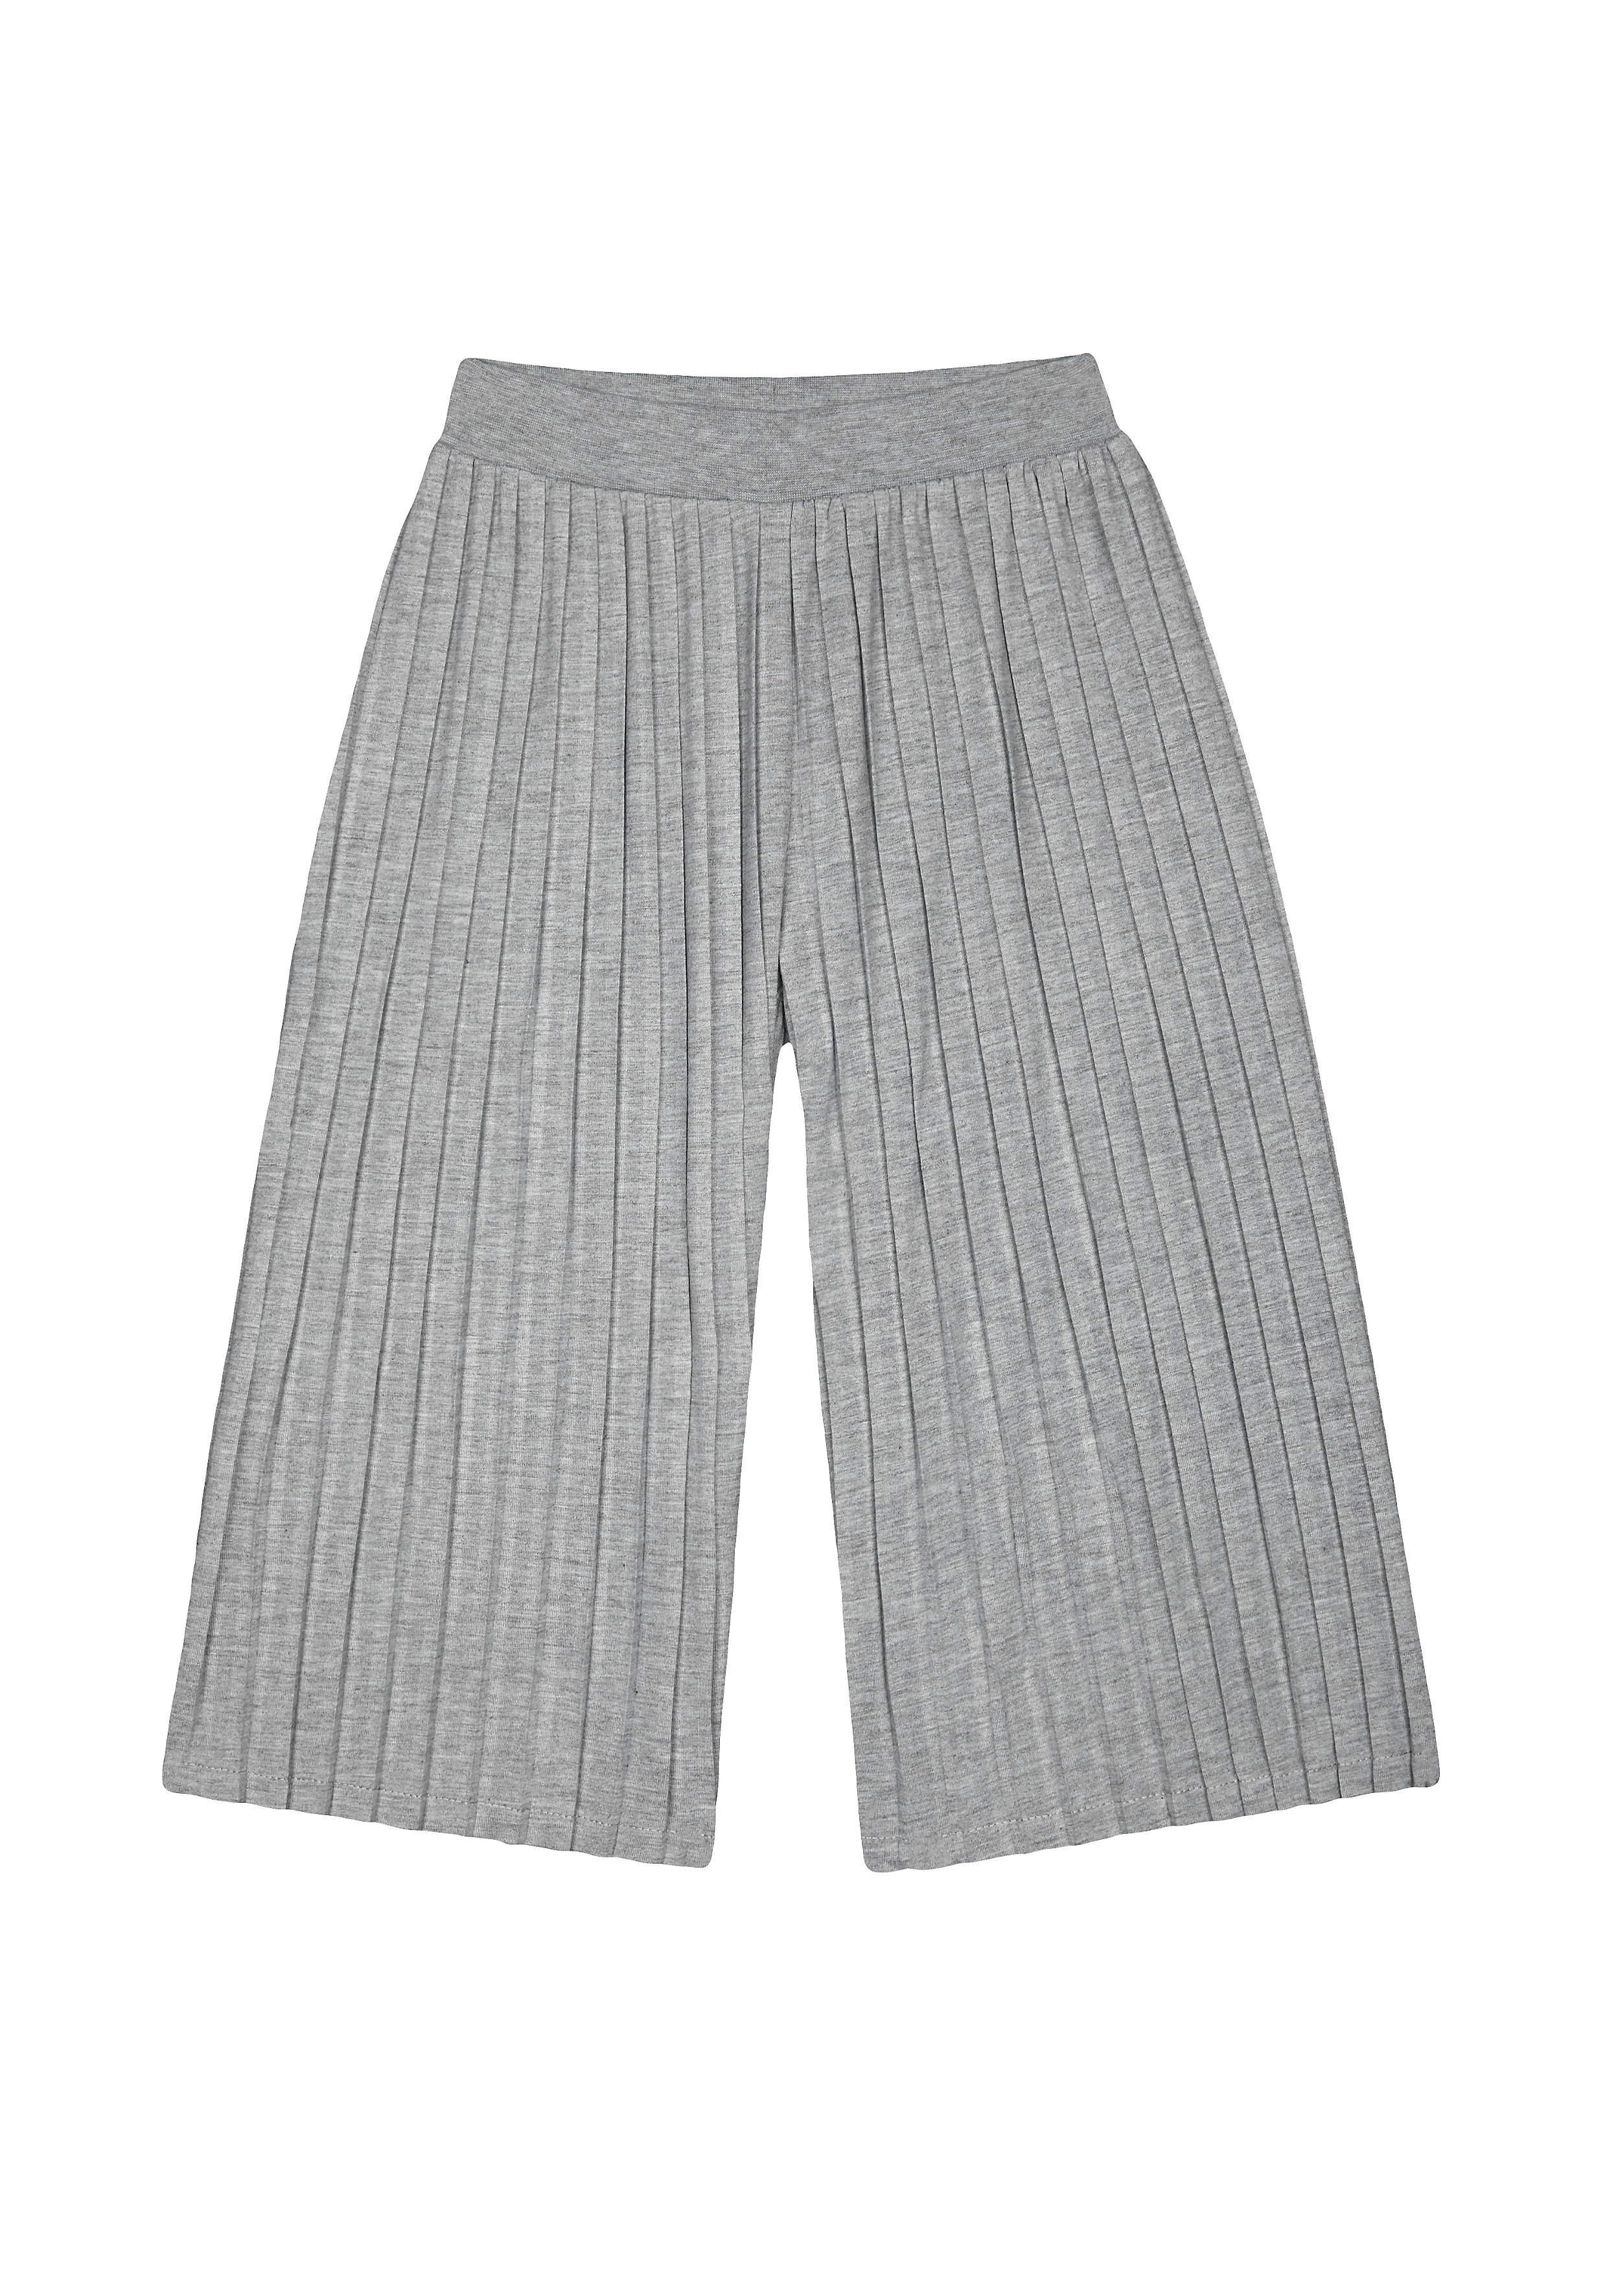 Mothercare | Girls Palazzo Pleated - Grey